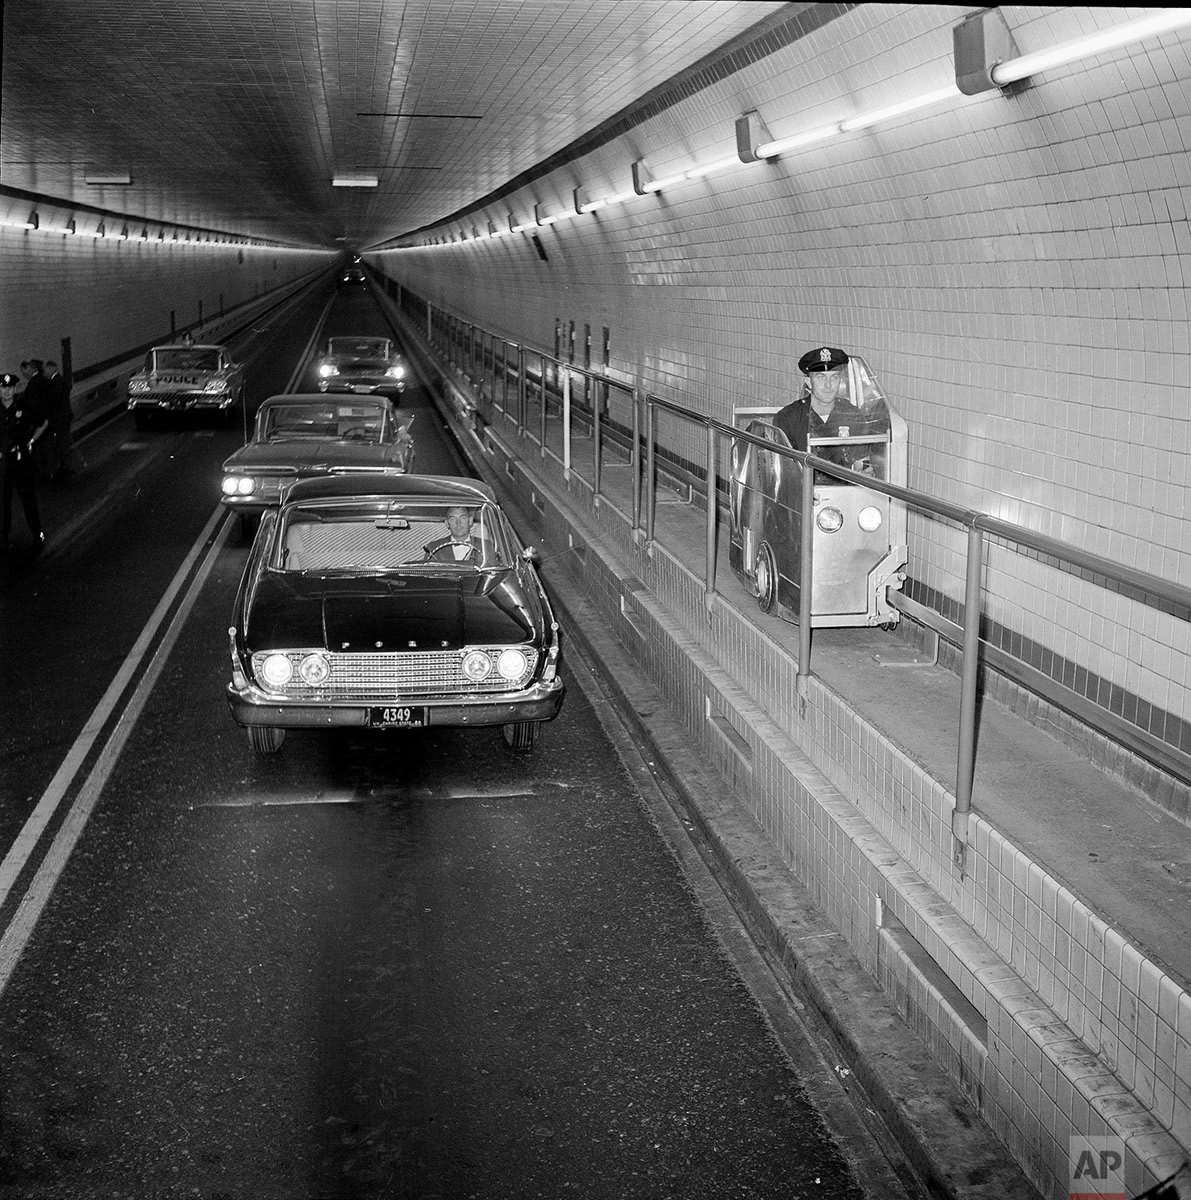 OTD in 1937, the first center tube of the Lincoln Tunnel connecting New York City and New Jersey beneath the Hudson River was opened to traffic. Photo shows a Port Authority officer demonstrate a self-propelled catwalk car near the Manhattan end of the Lincoln Tunnel in 1960.